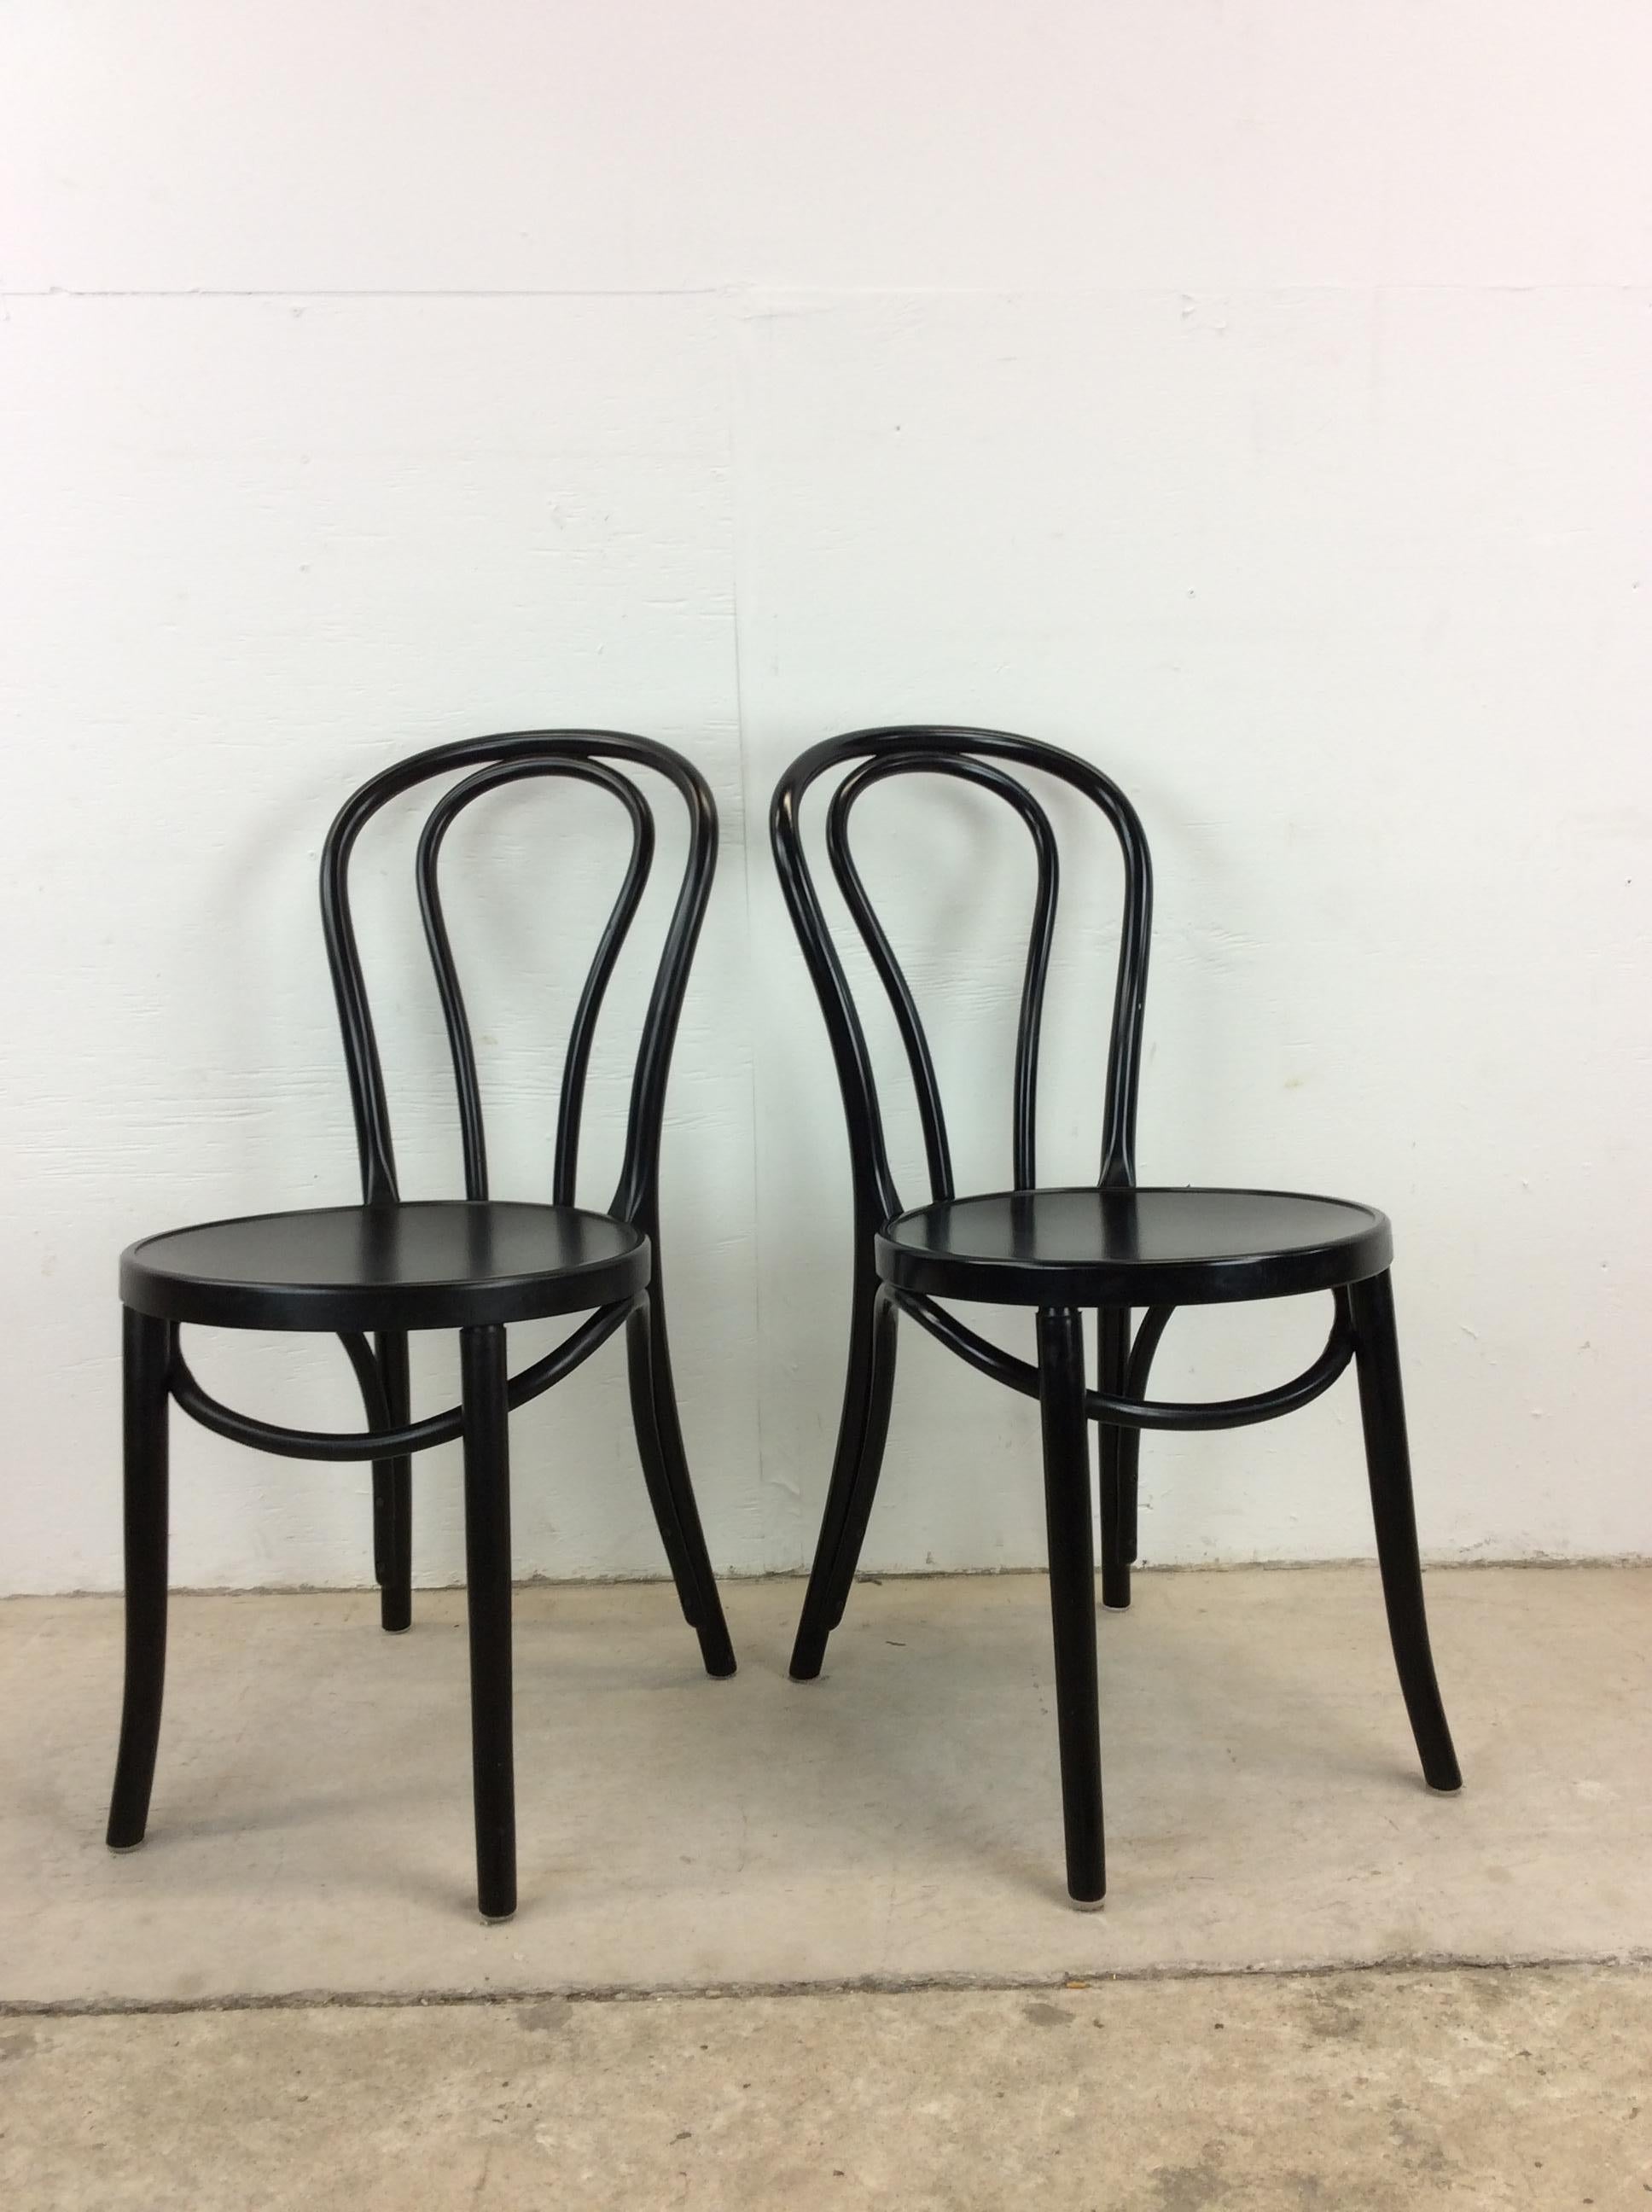 Set of 4 Vintage IKEA Black Cafe Style Chairs For Sale 1